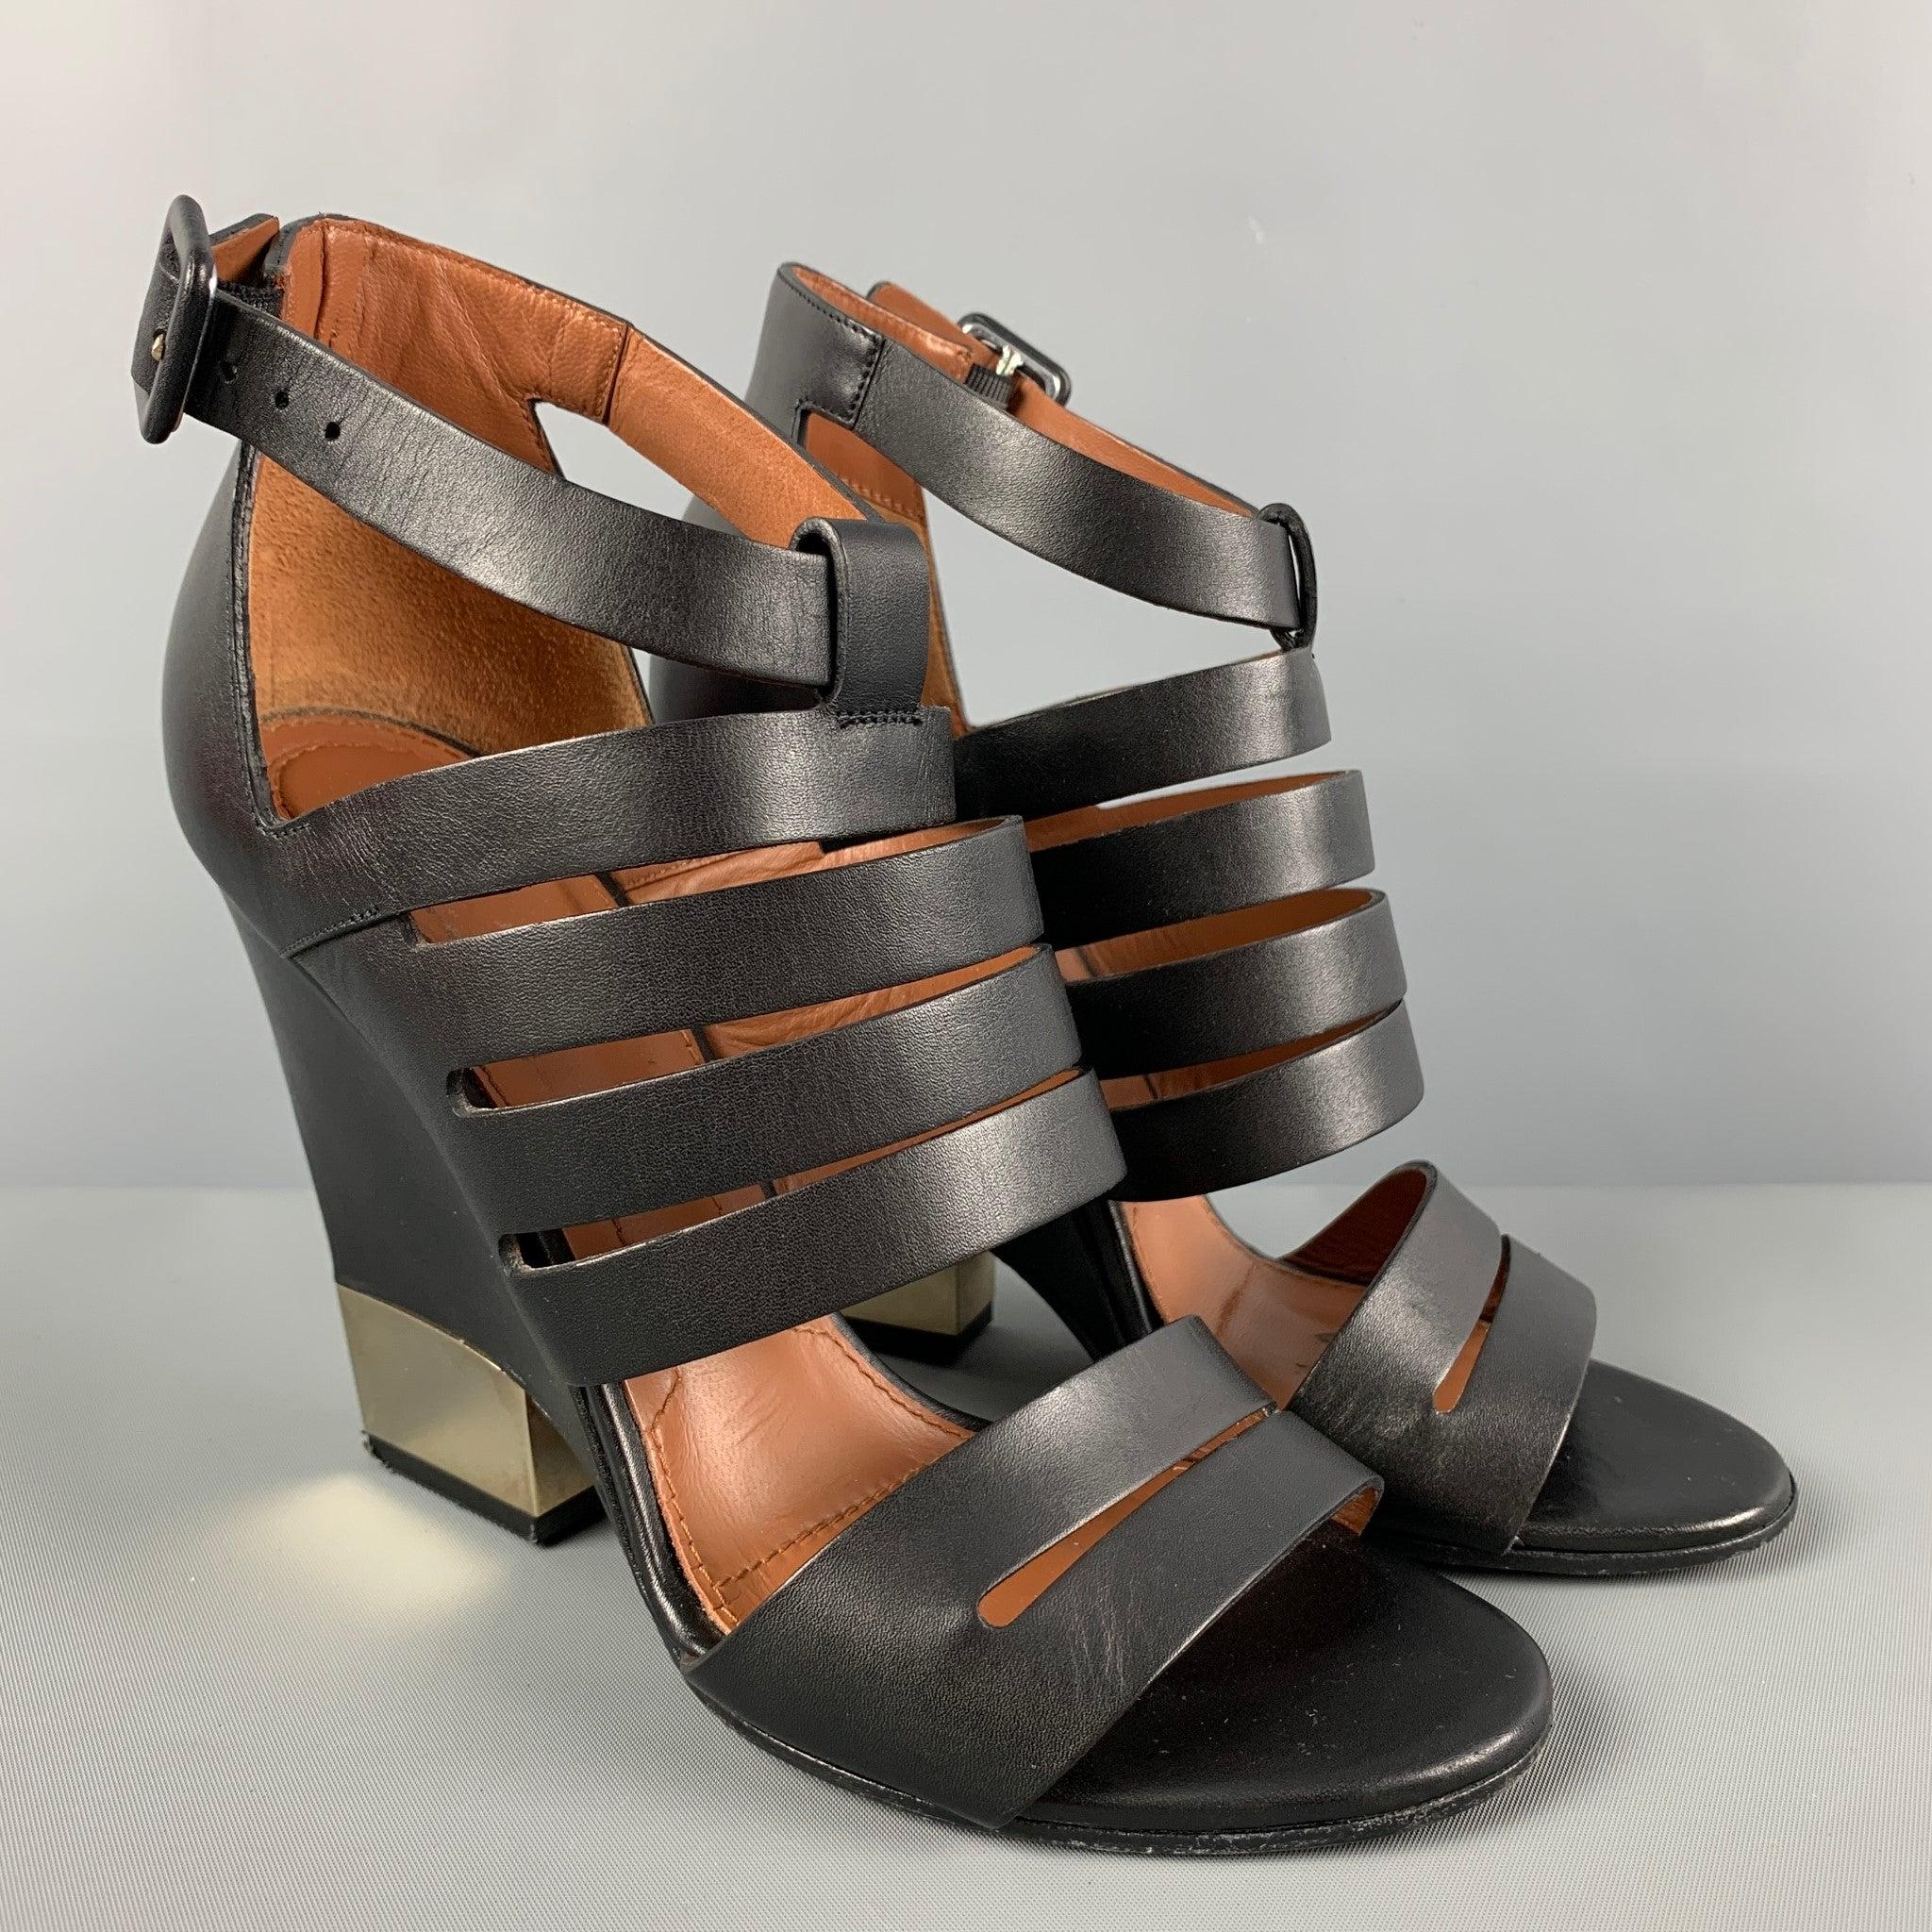 GIVENCHY heels comes in a black leather featuring a open toe, ankle strap closure, and a wedge heel with a metal detail.
Good Pre-Owned Condition.
Light wear. As-is.  

Marked:   36.5 

Measurements: 
  Heel:
4 inches 
  
  
 
Reference: